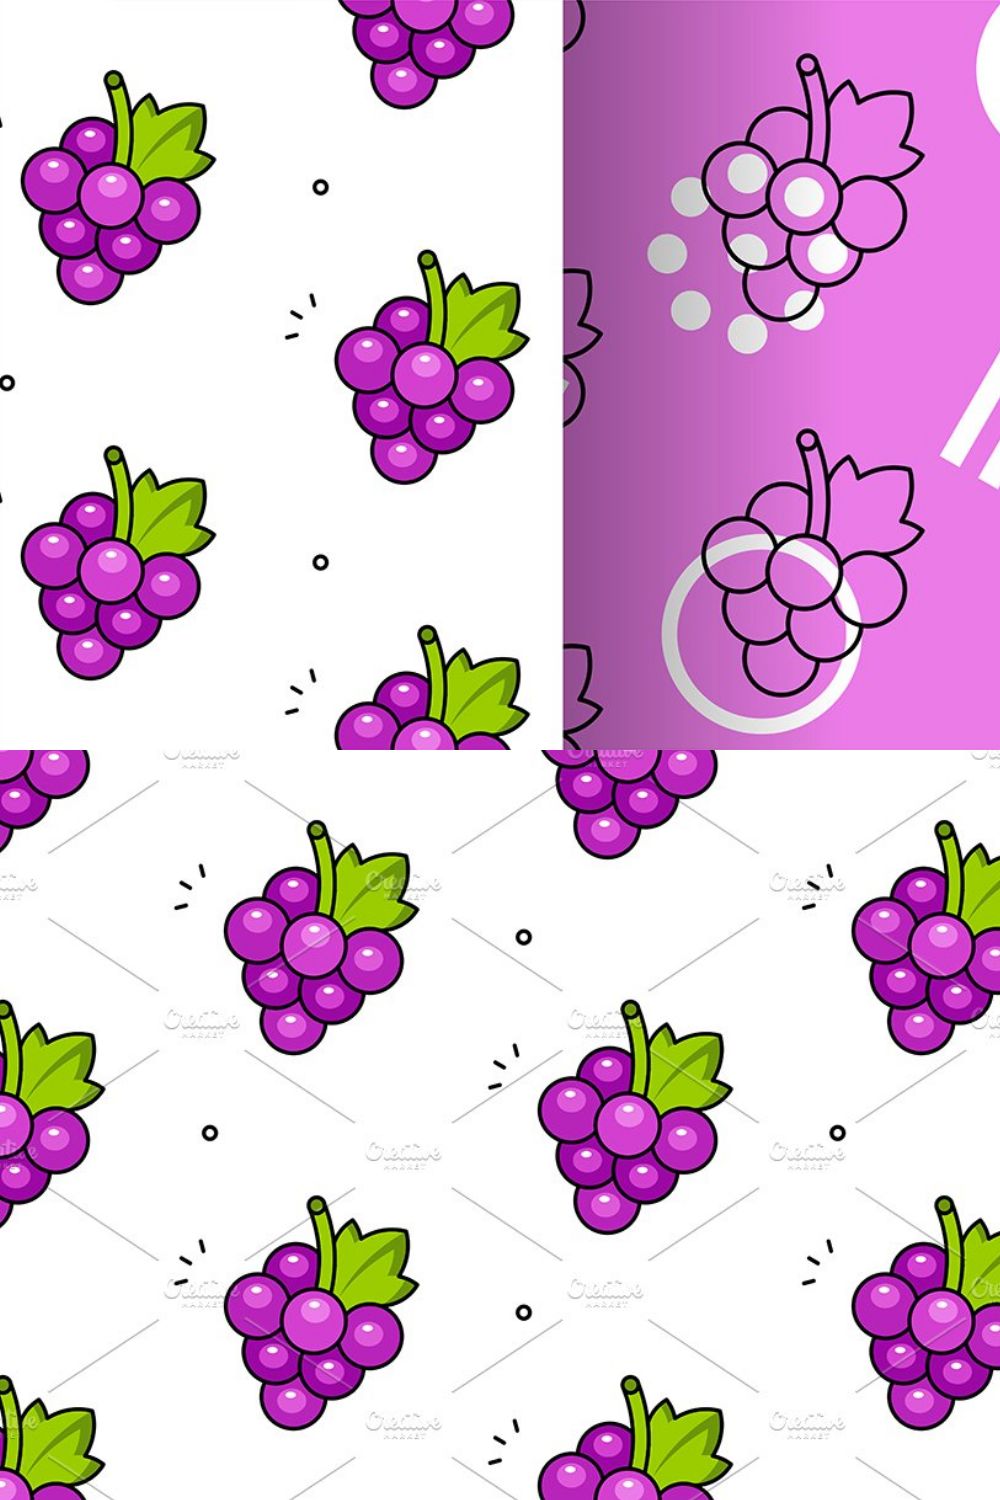 Grapes seamless pattern pinterest preview image.